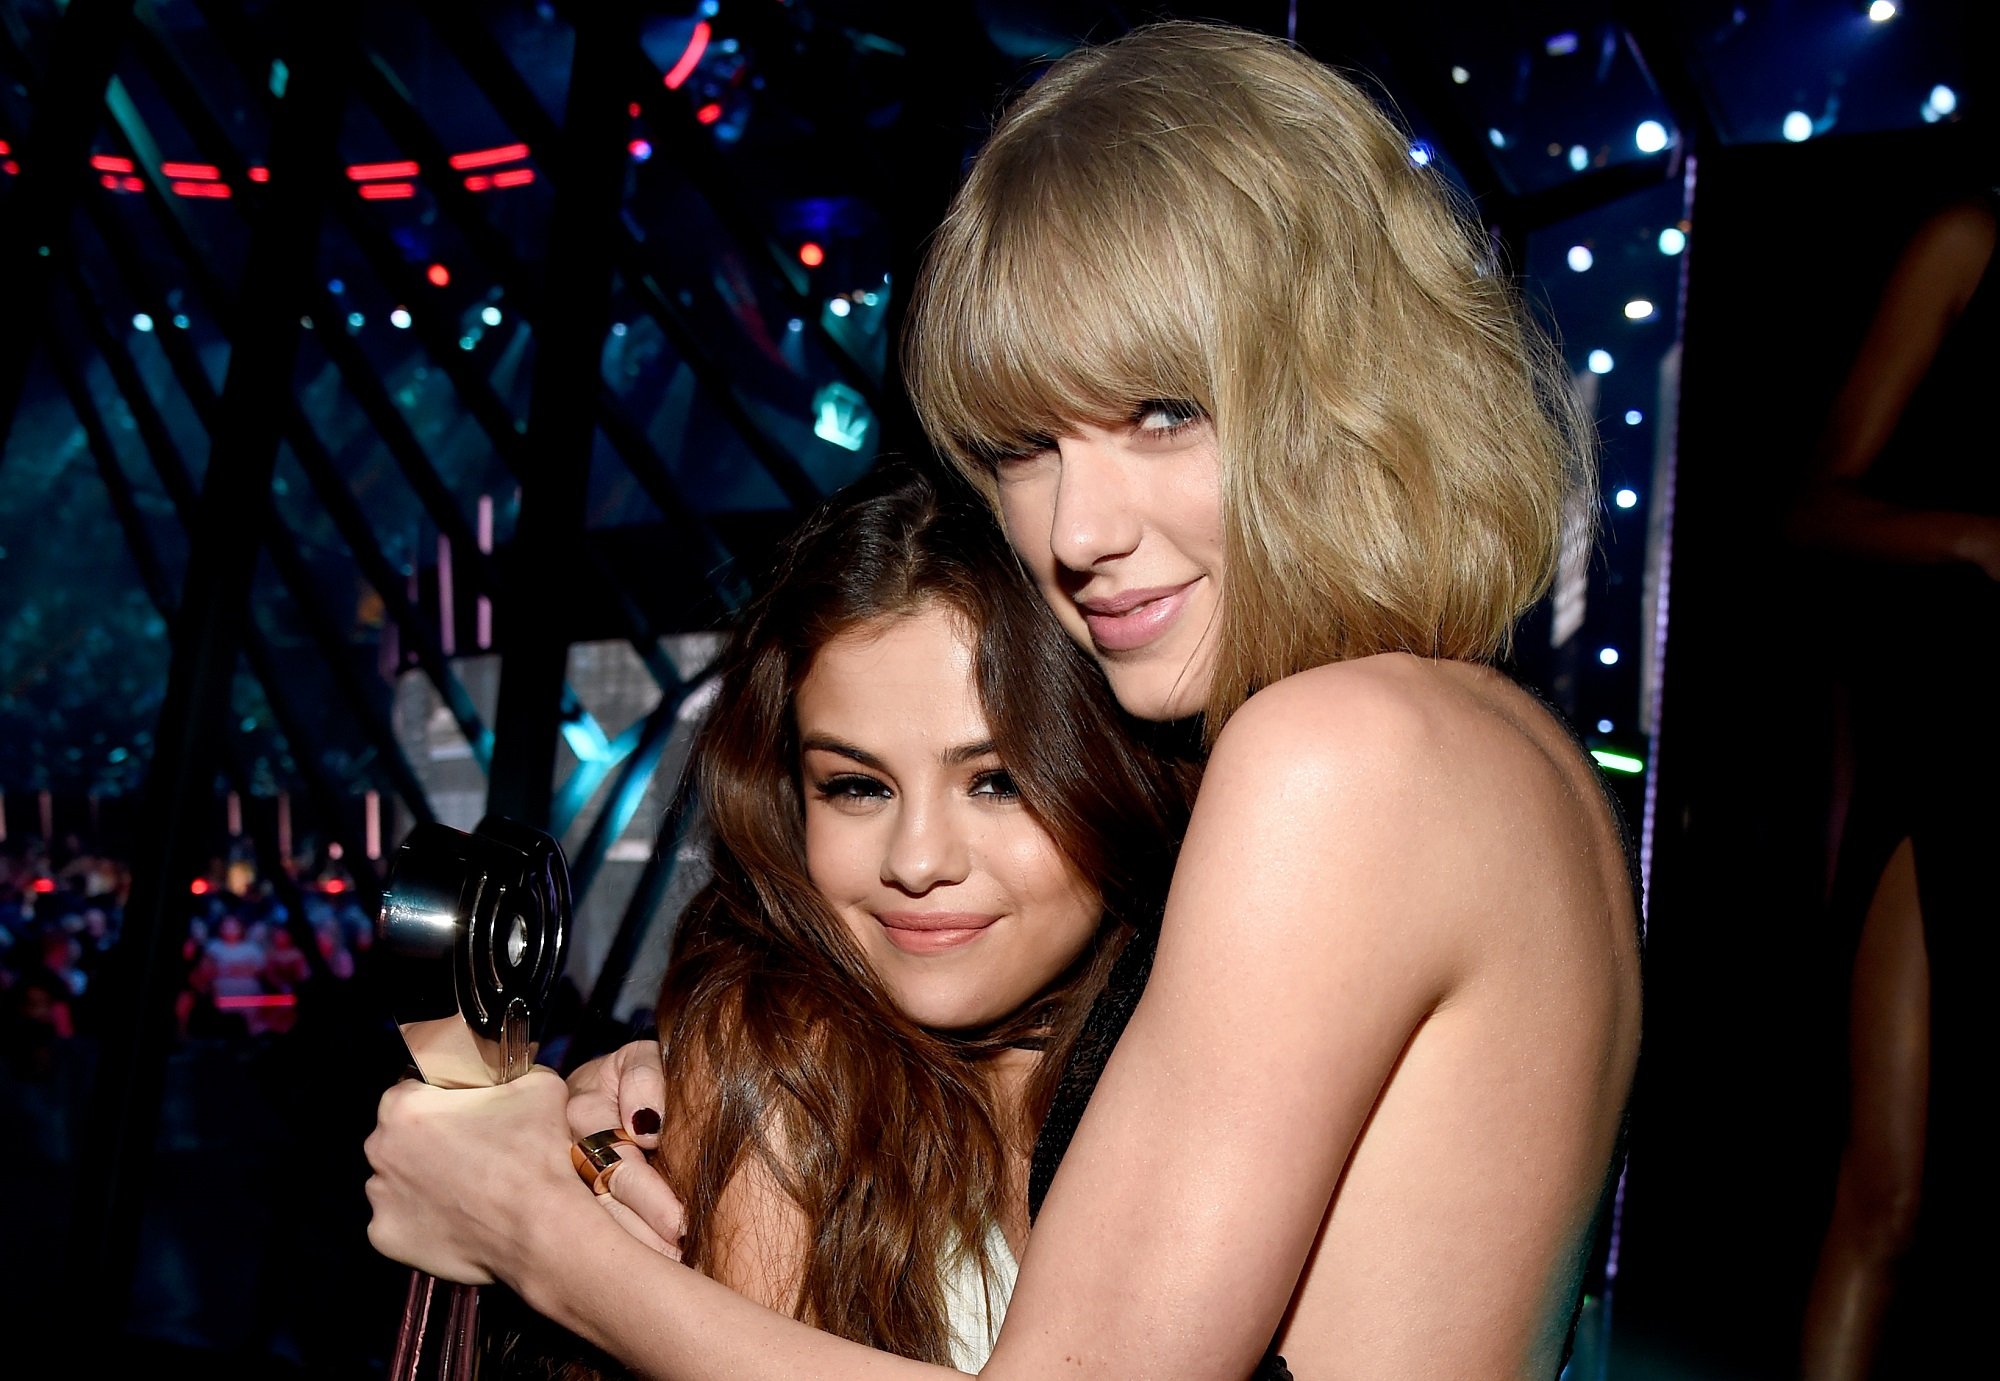 Selena Gomez and Taylor Swift backstage at the iHeartRadio Music Awards on April 3, 2016 in Inglewood, California.